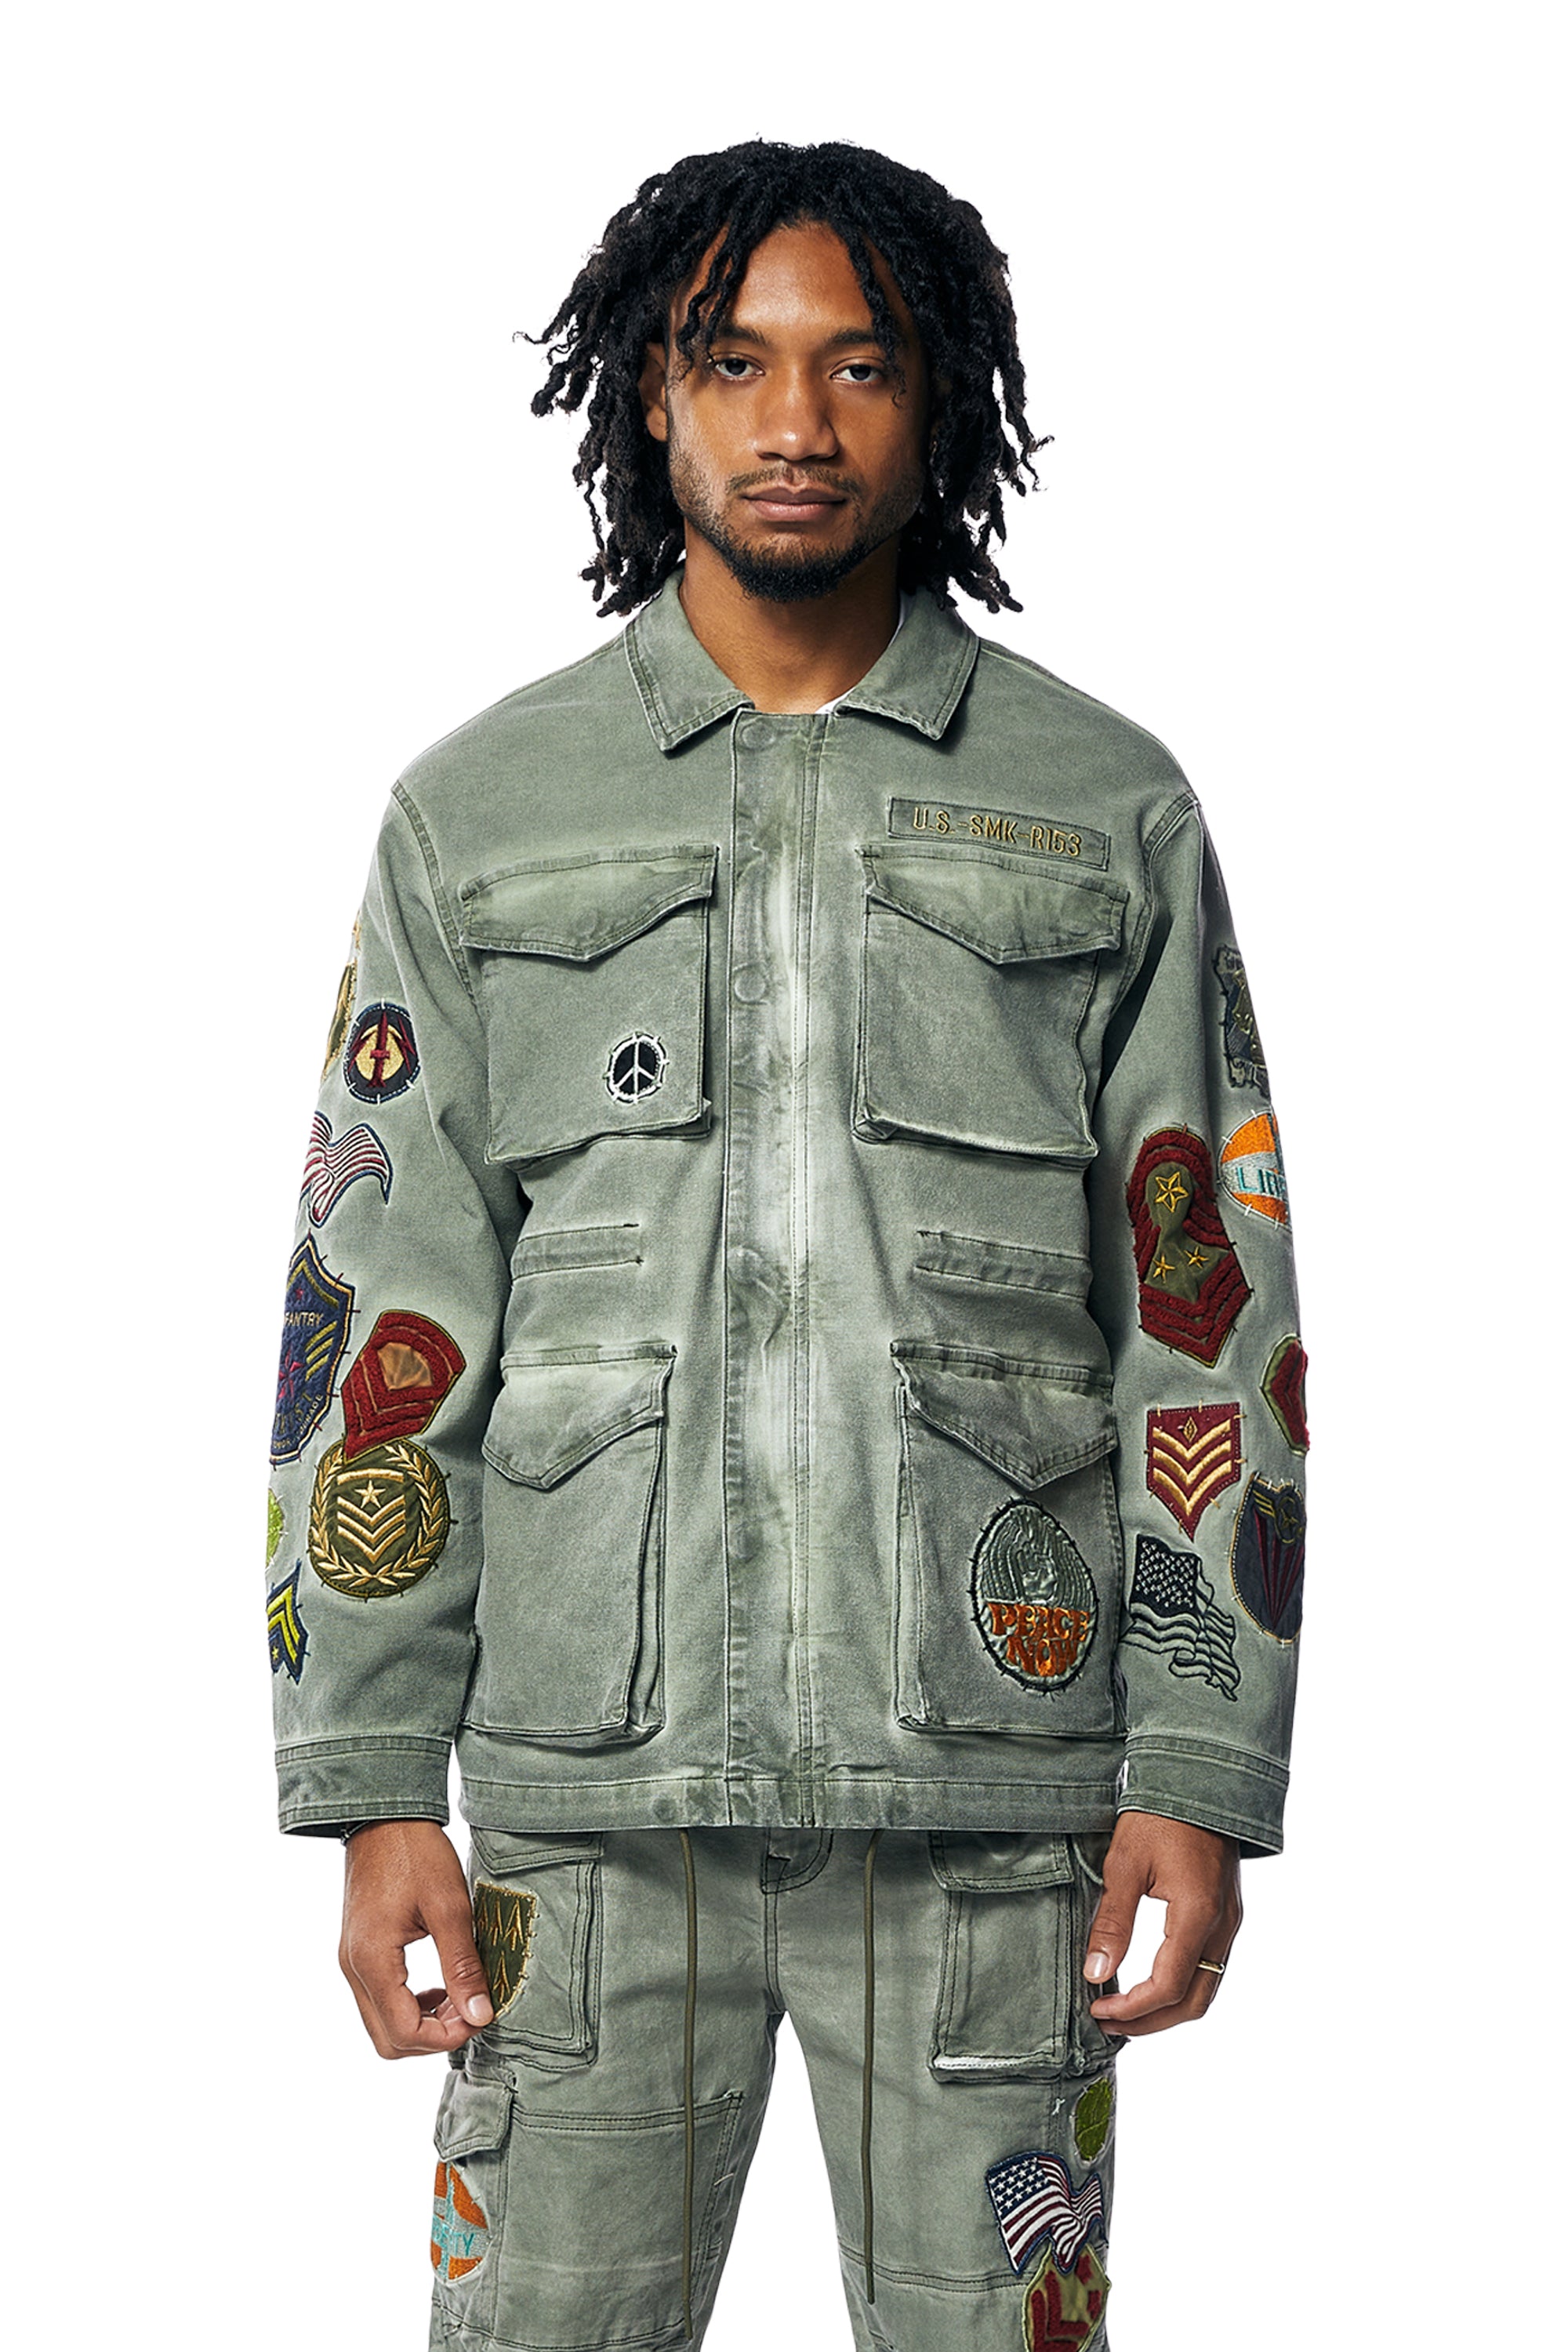 Pigment Dyed Twill M-65 Jacket - Vintage Army